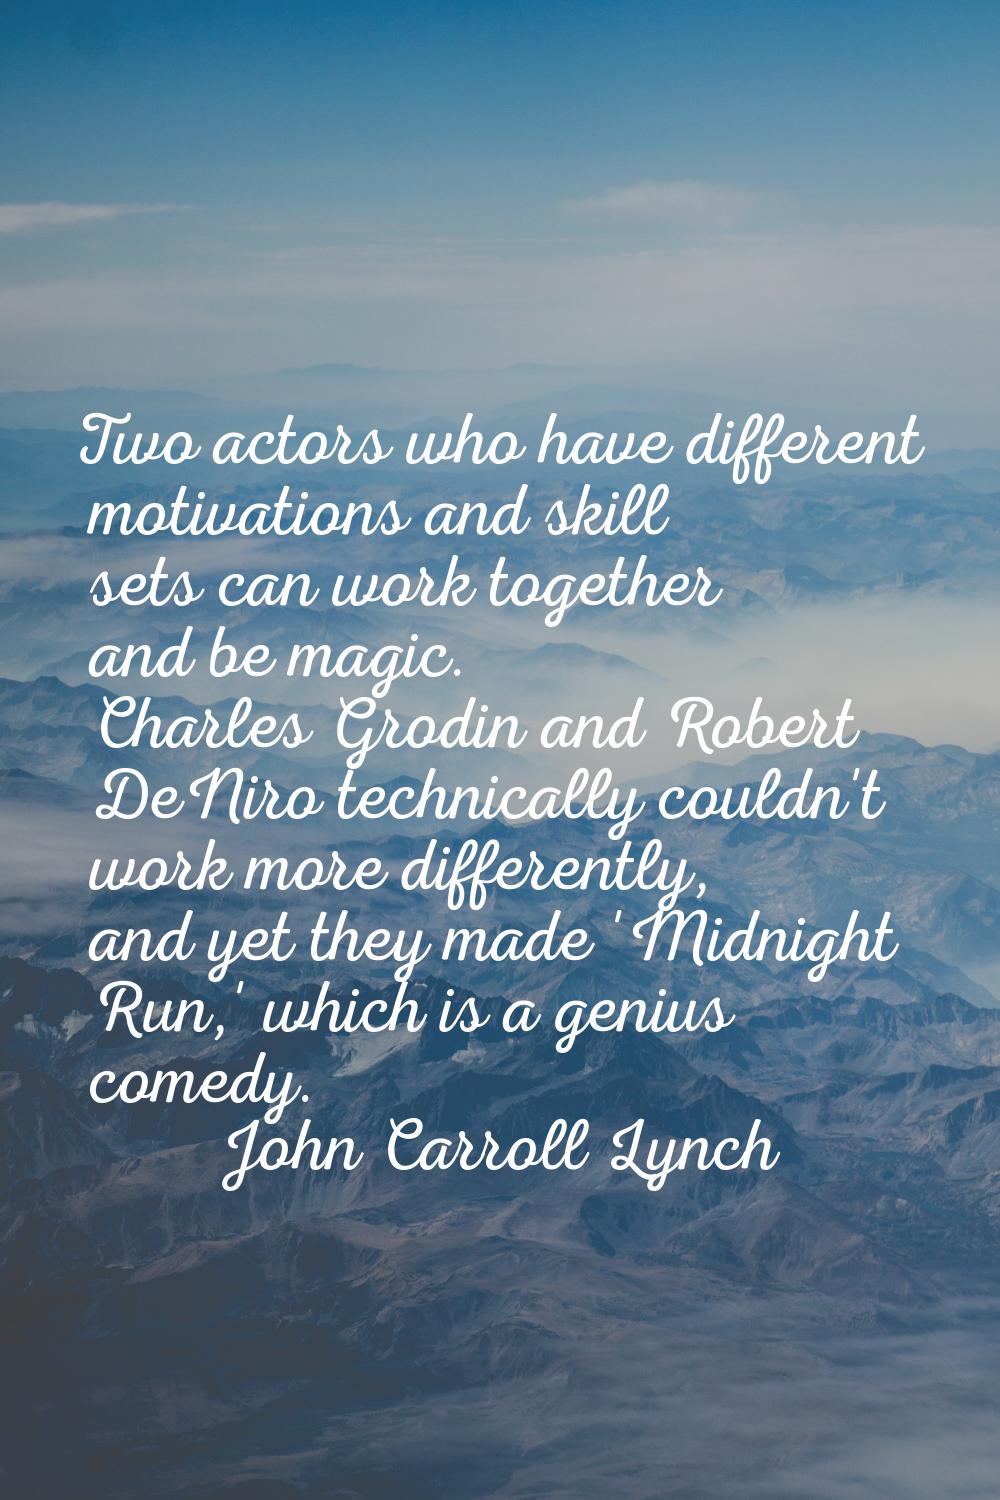 Two actors who have different motivations and skill sets can work together and be magic. Charles Gr